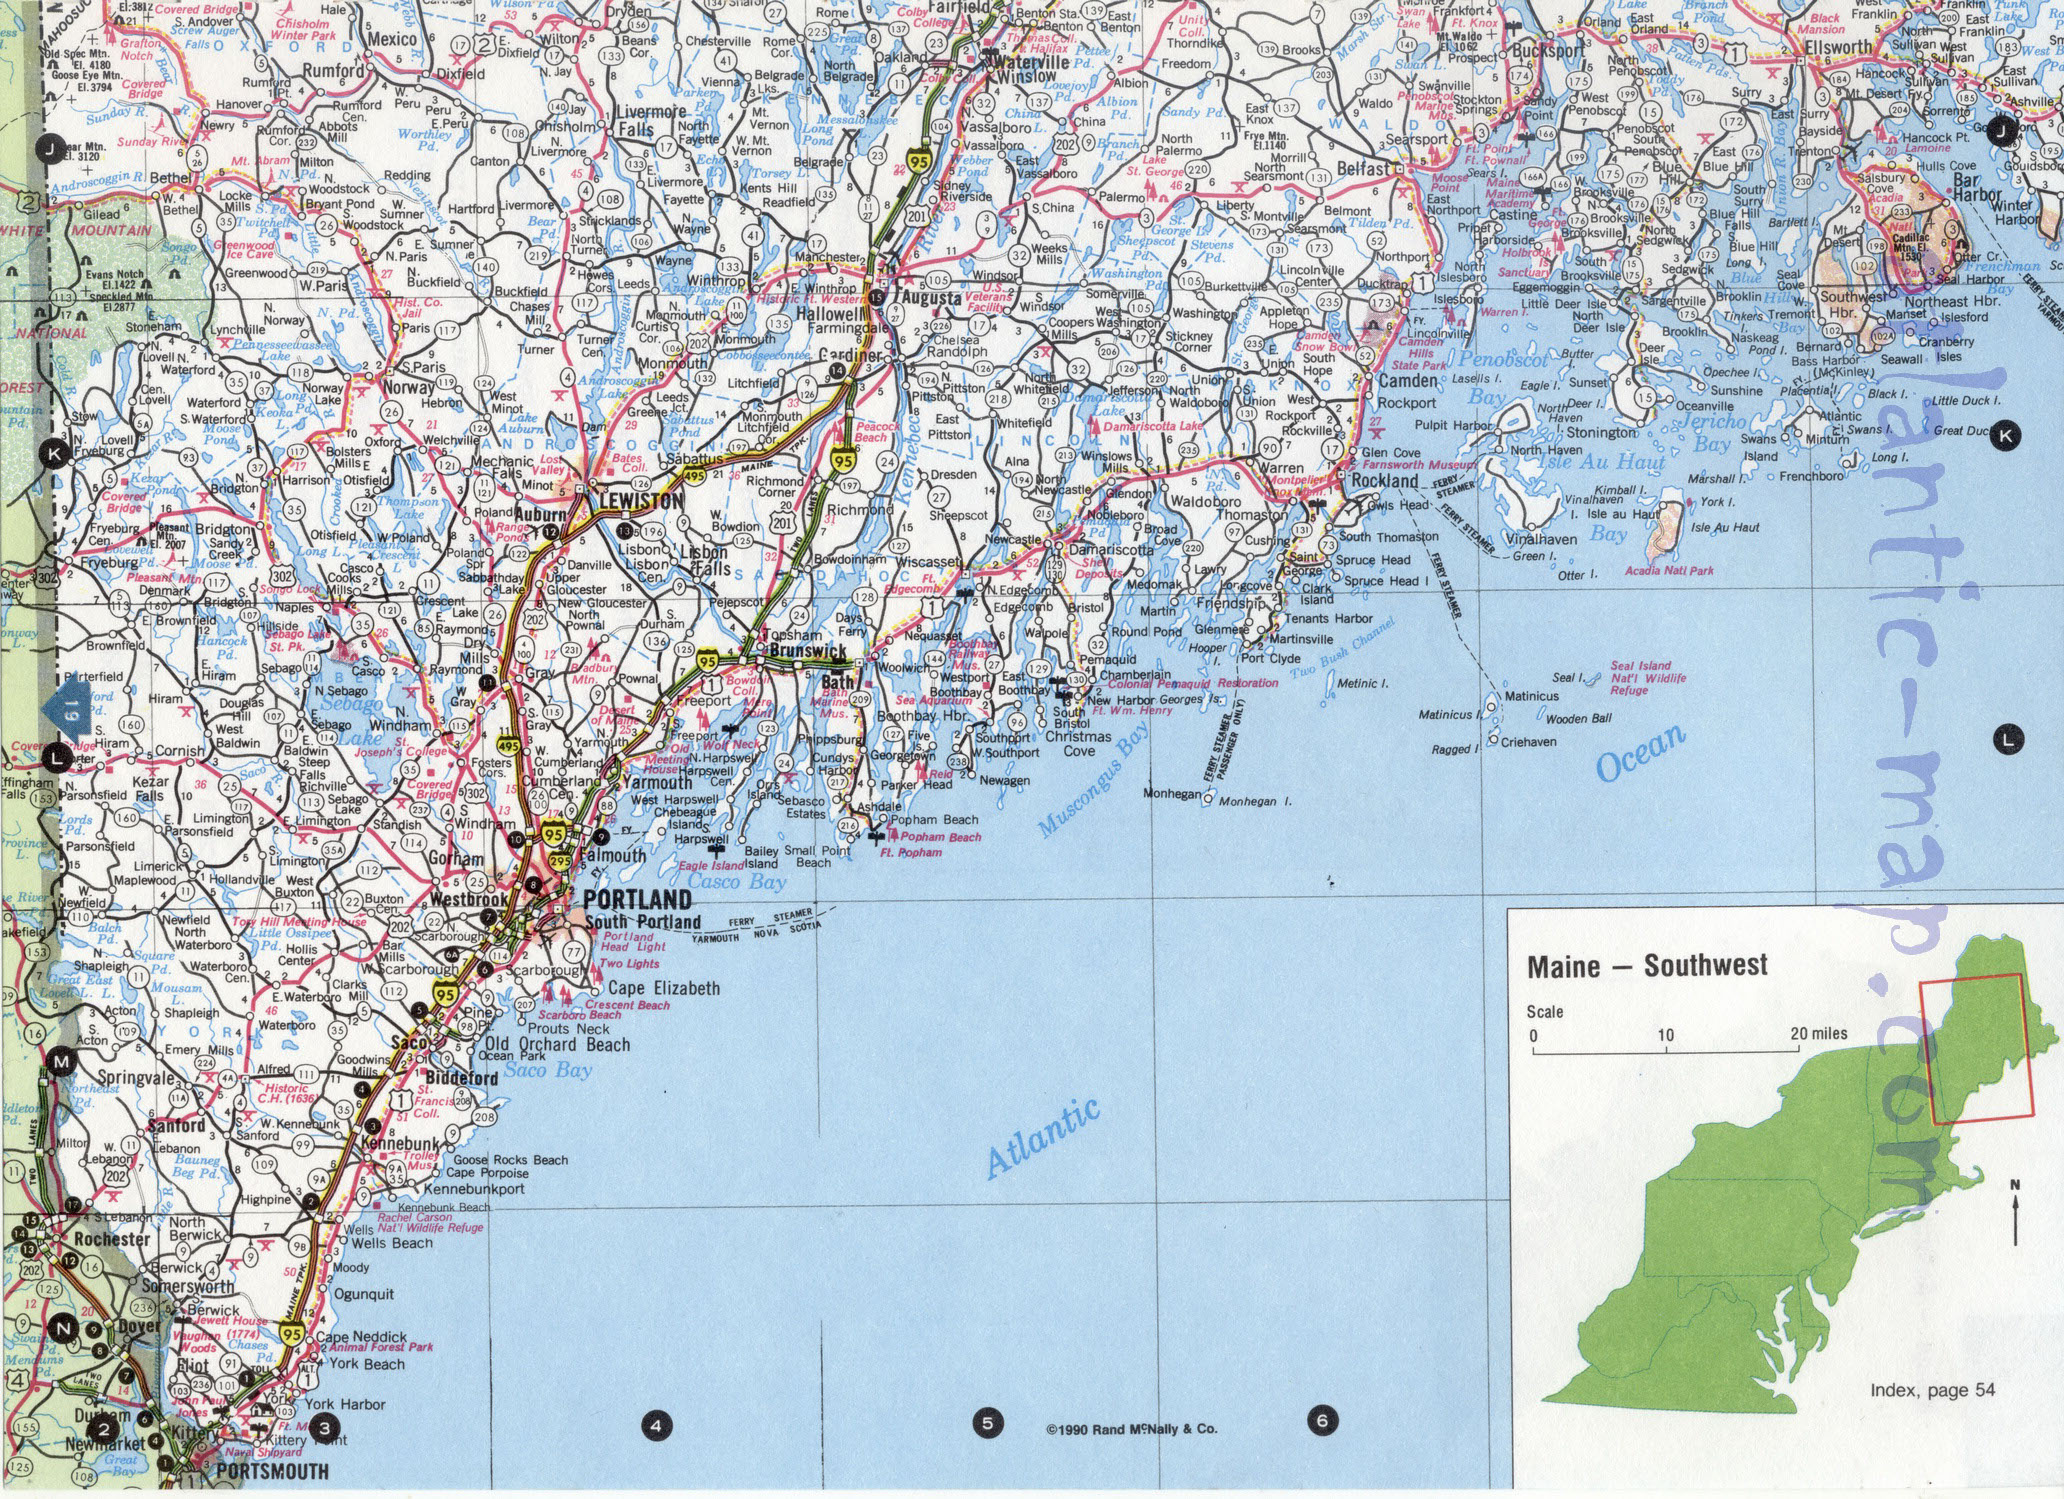 Southwest Maine state road map